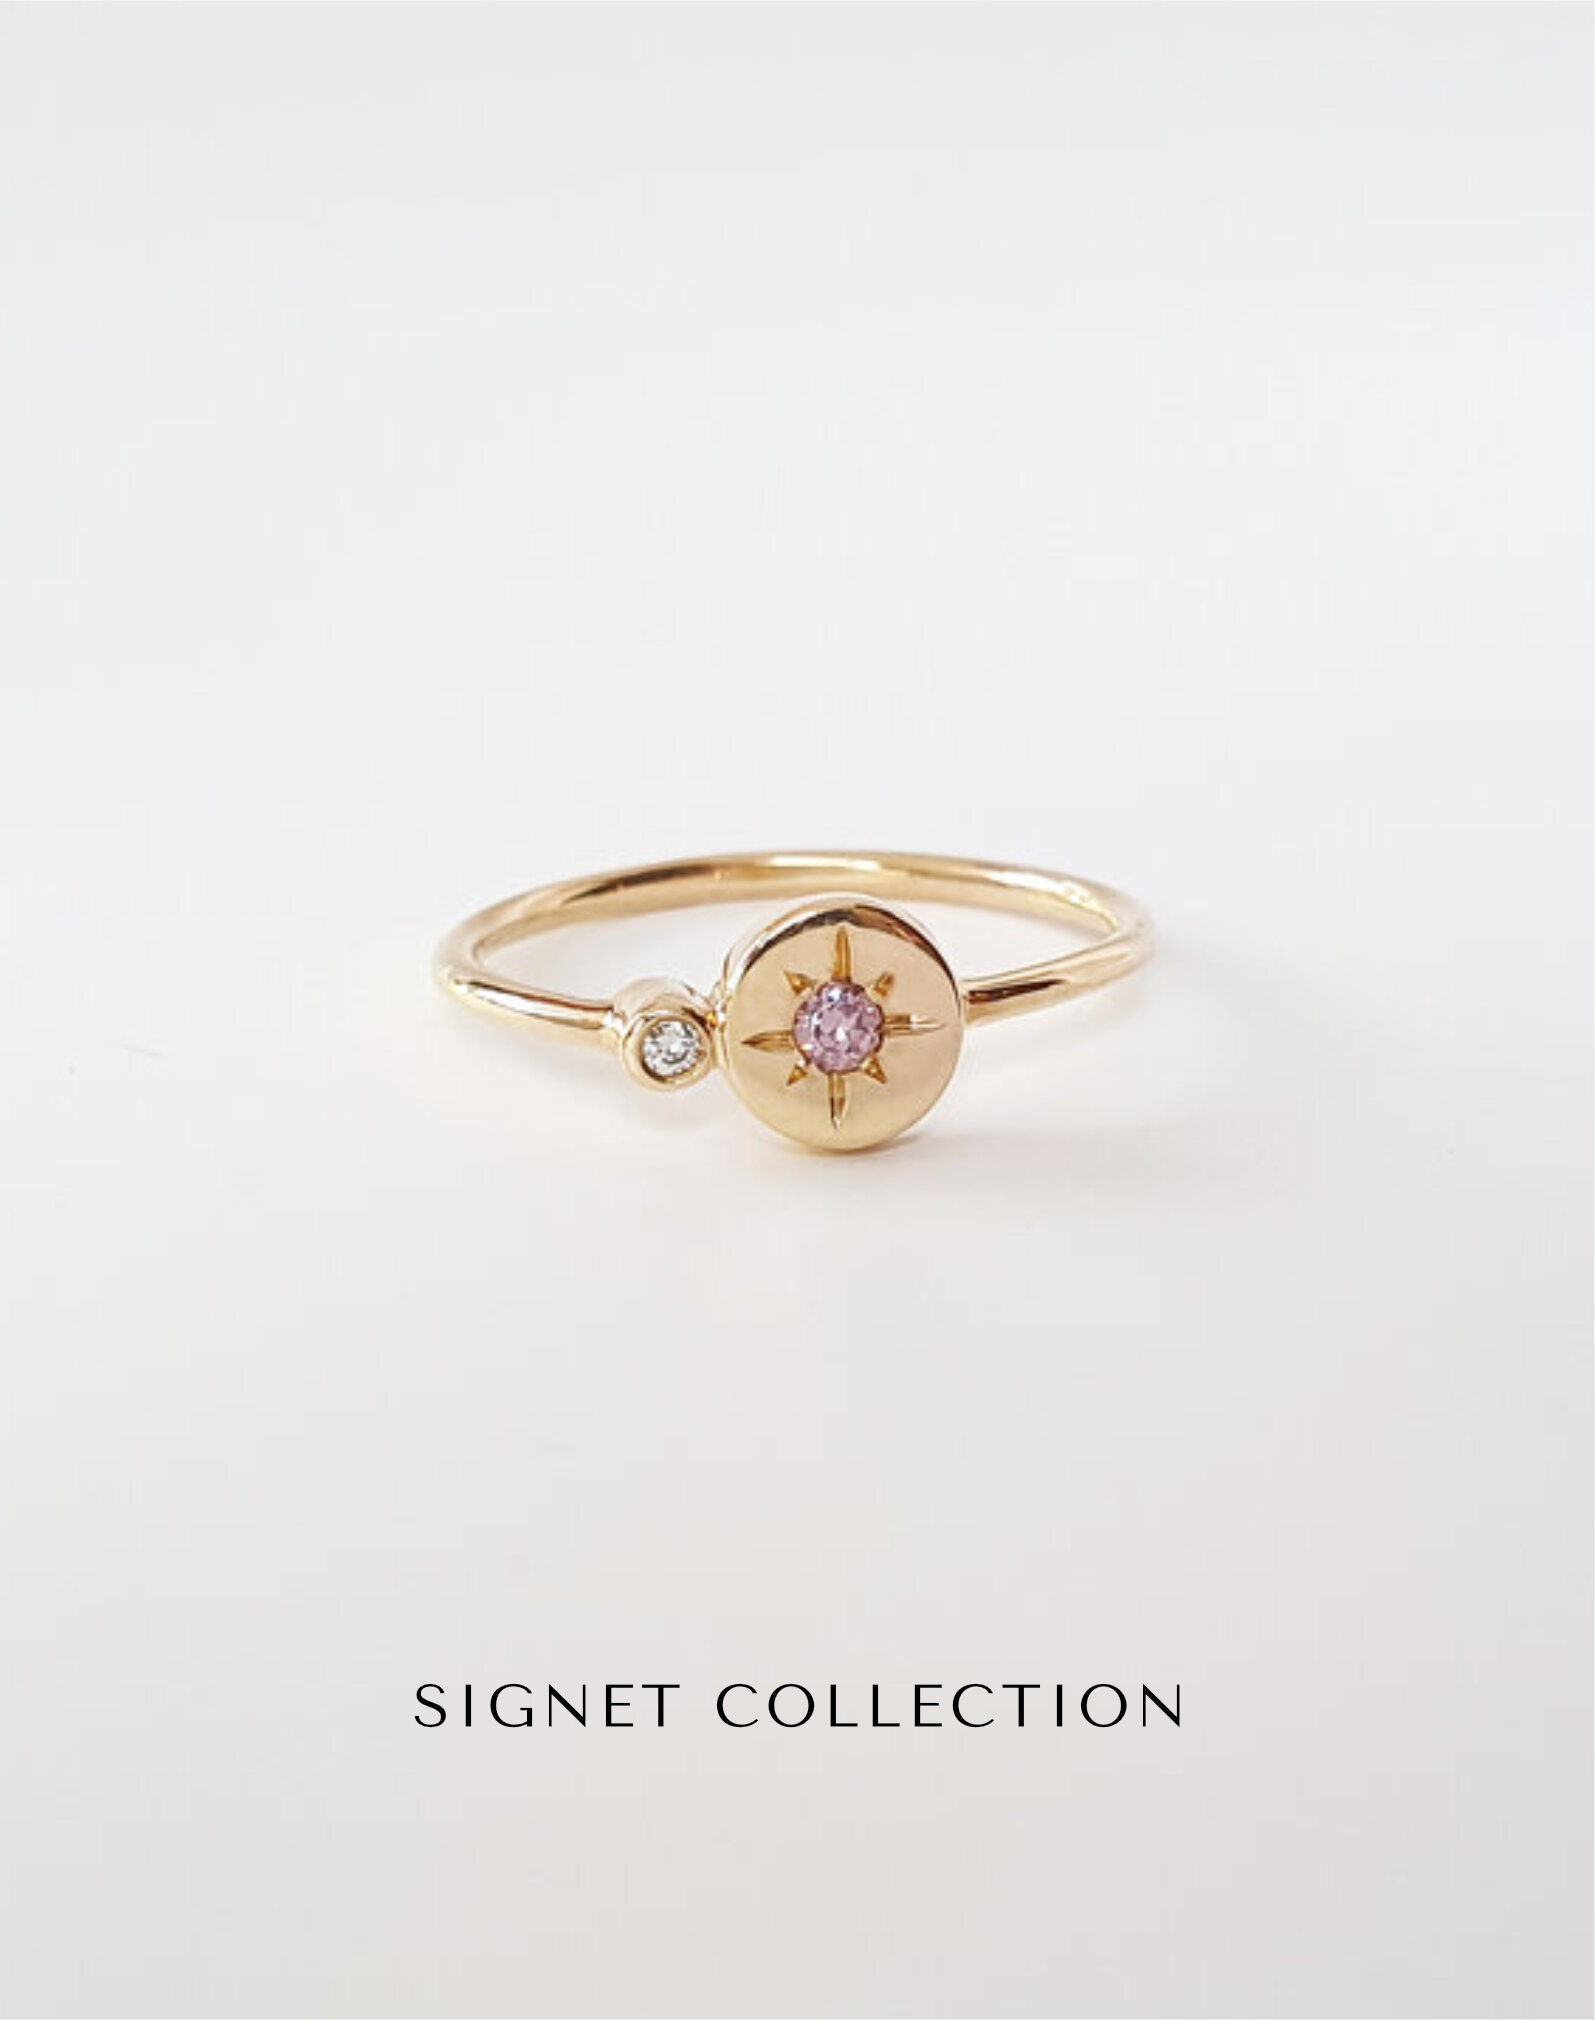 SIGNET COLLECTION